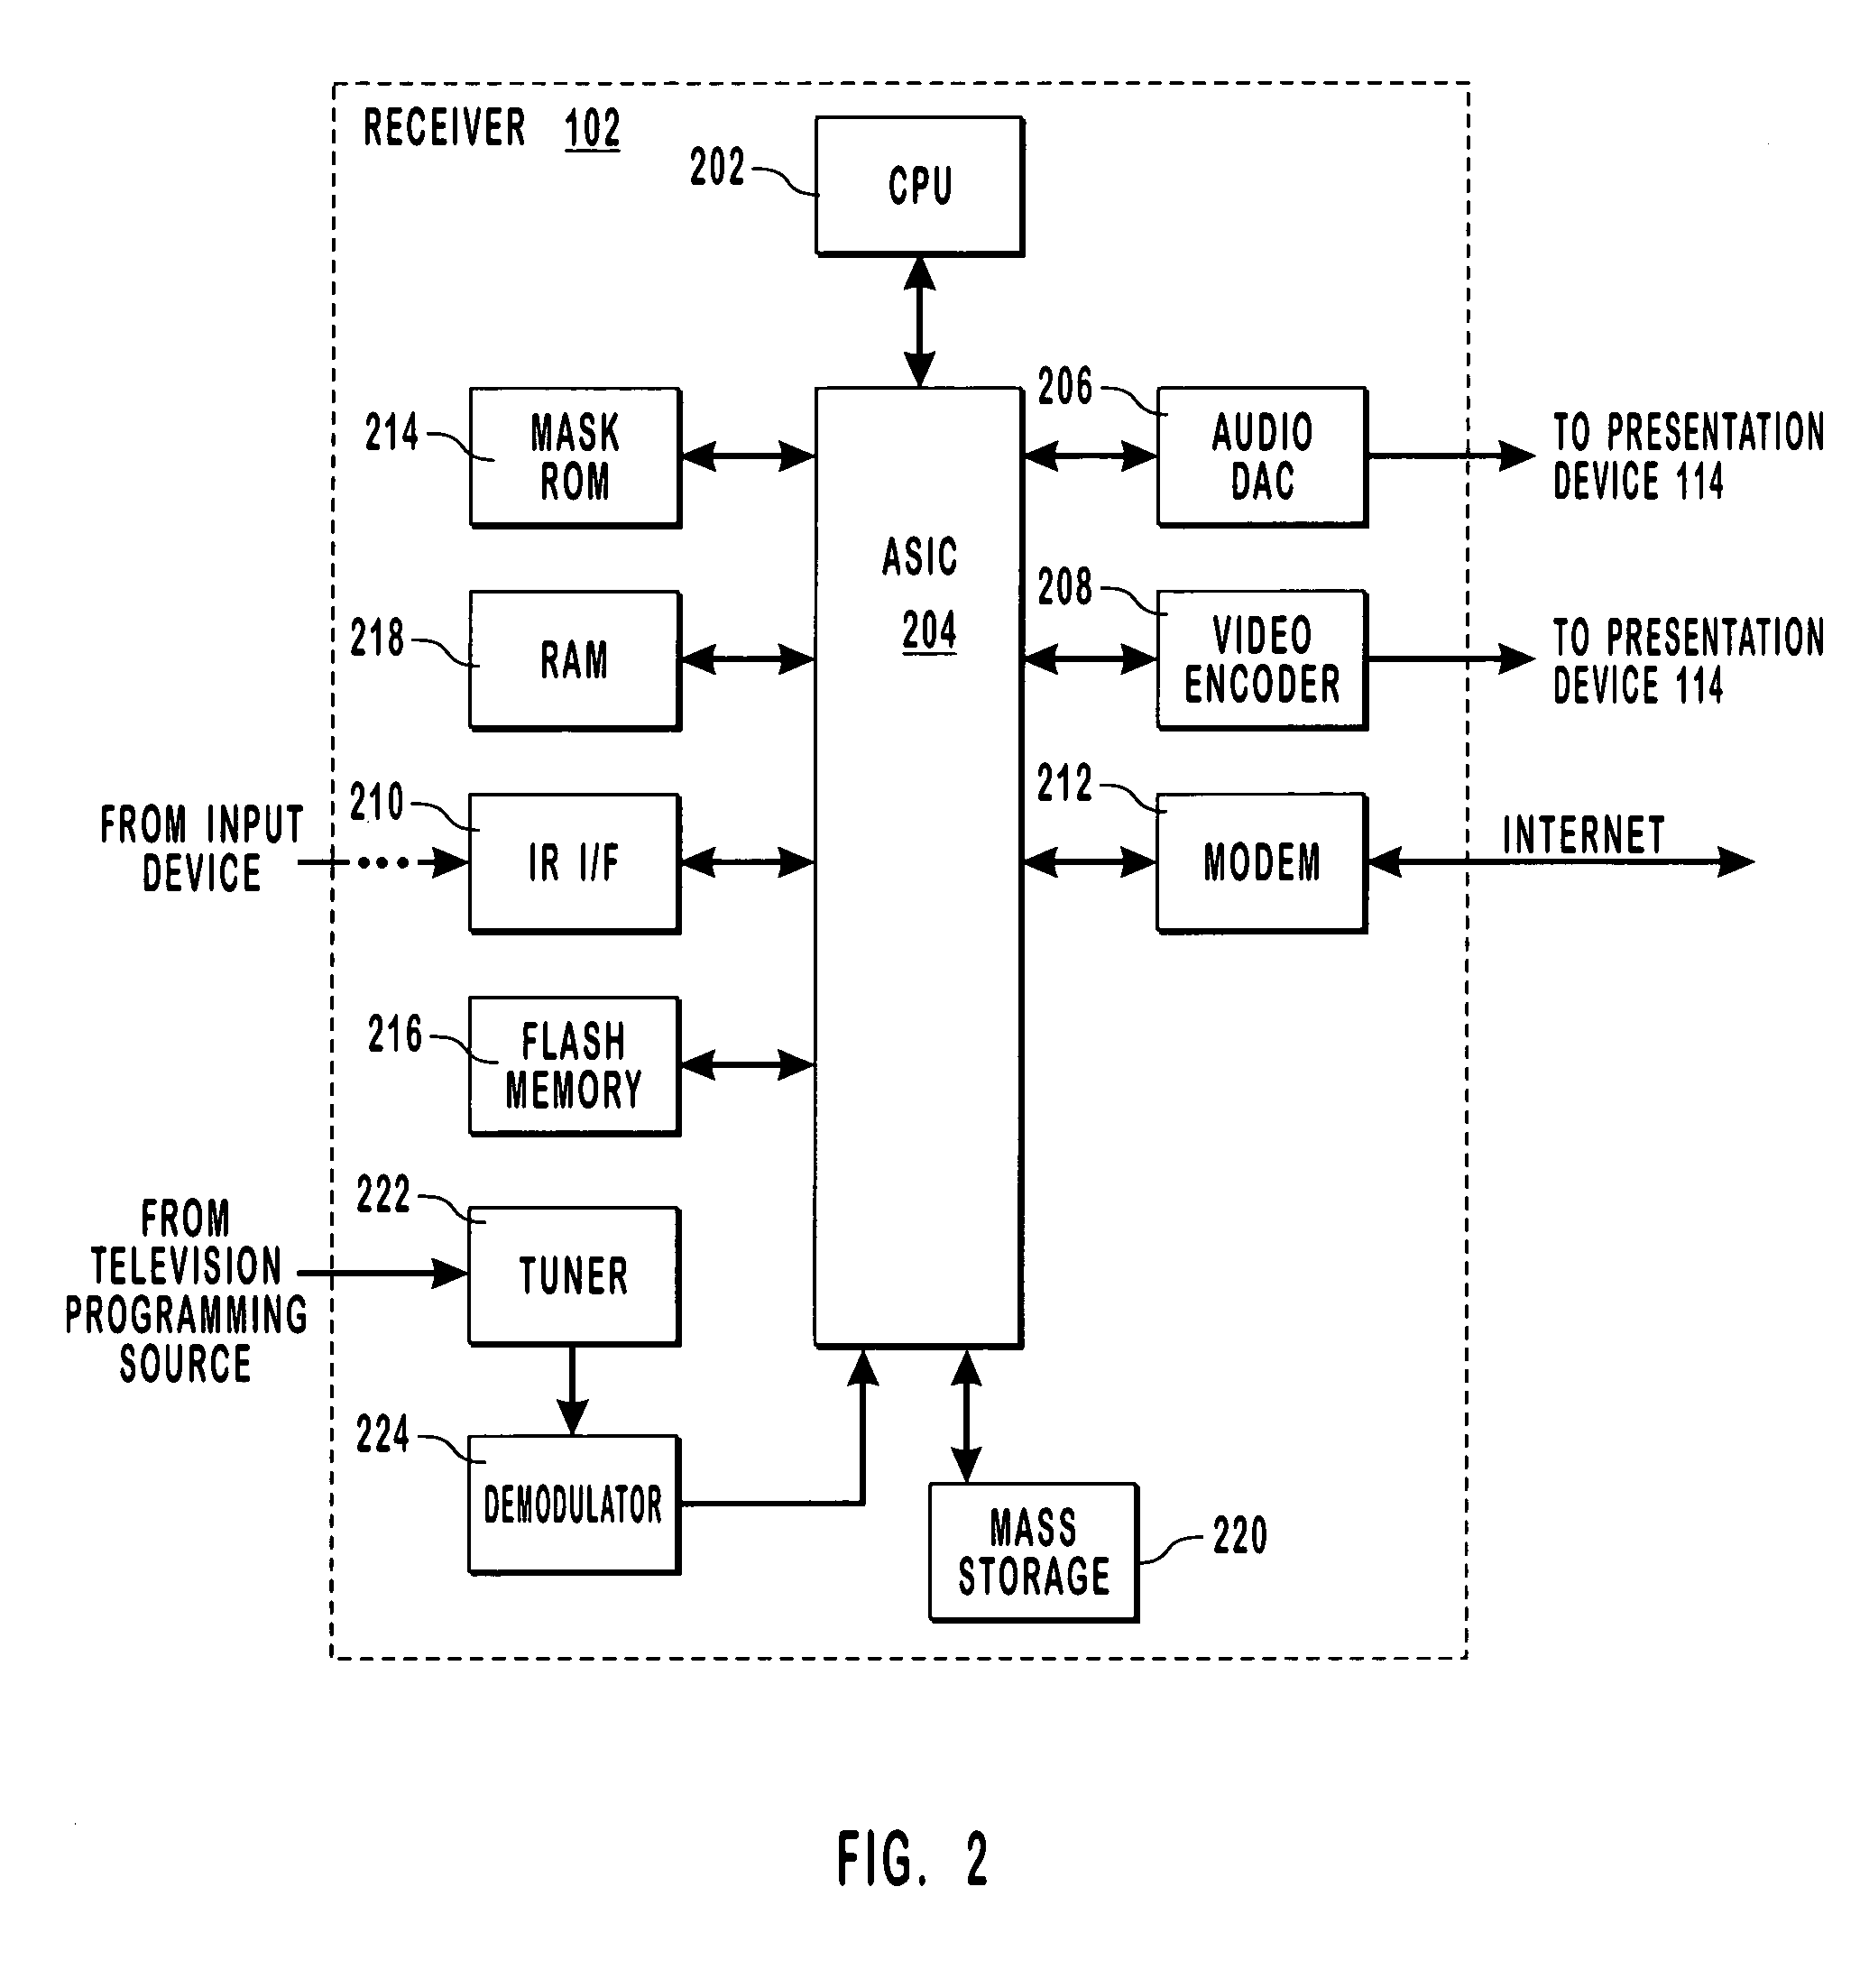 Methods and systems for independently controlling the presentation speed of digital video frames and digital audio samples